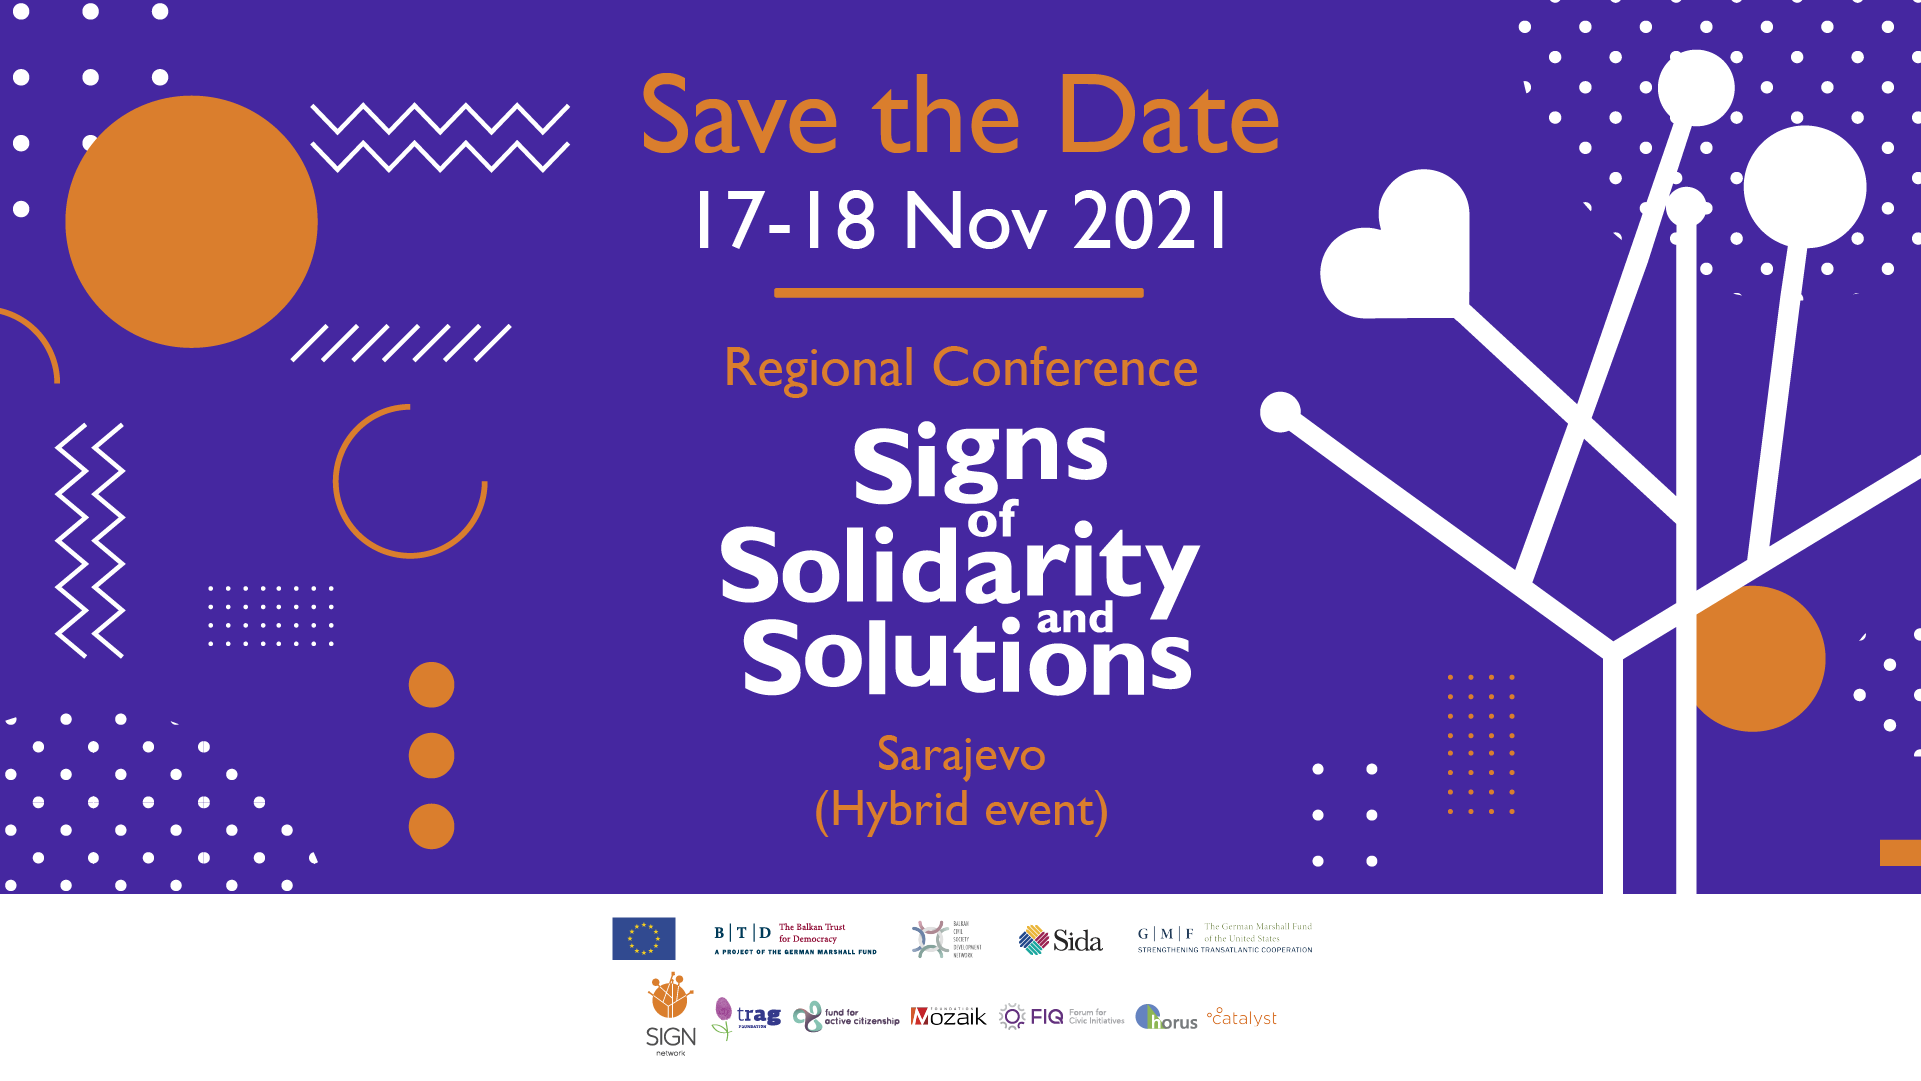 Save the Date: Regional Conference – SIGNS of Solidarity and Solutions